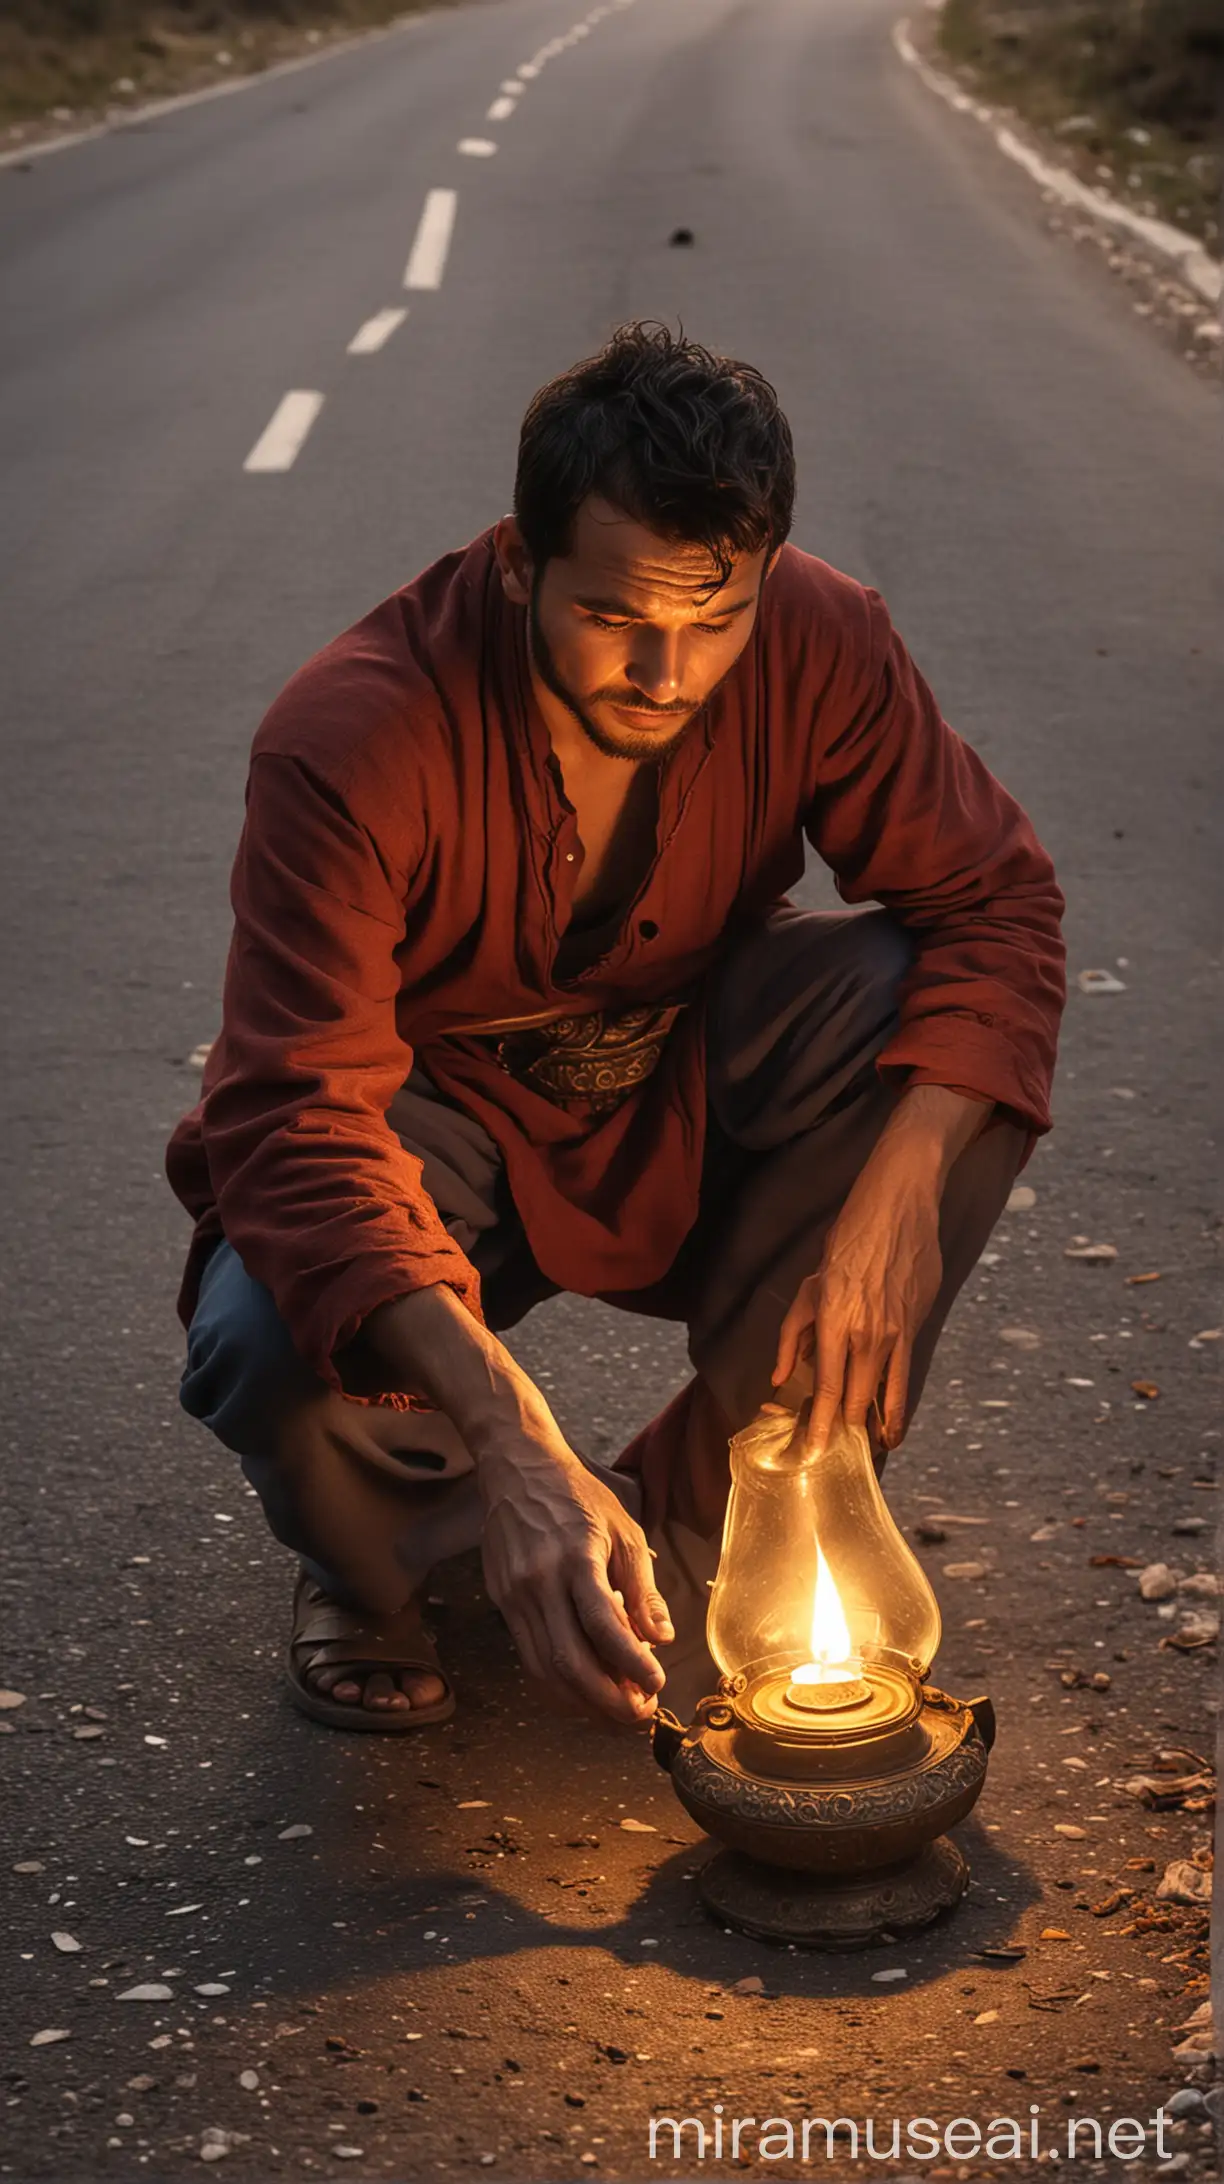 Man Discovers Ancient Oil Lamp and Receives Three Wishes from Genie